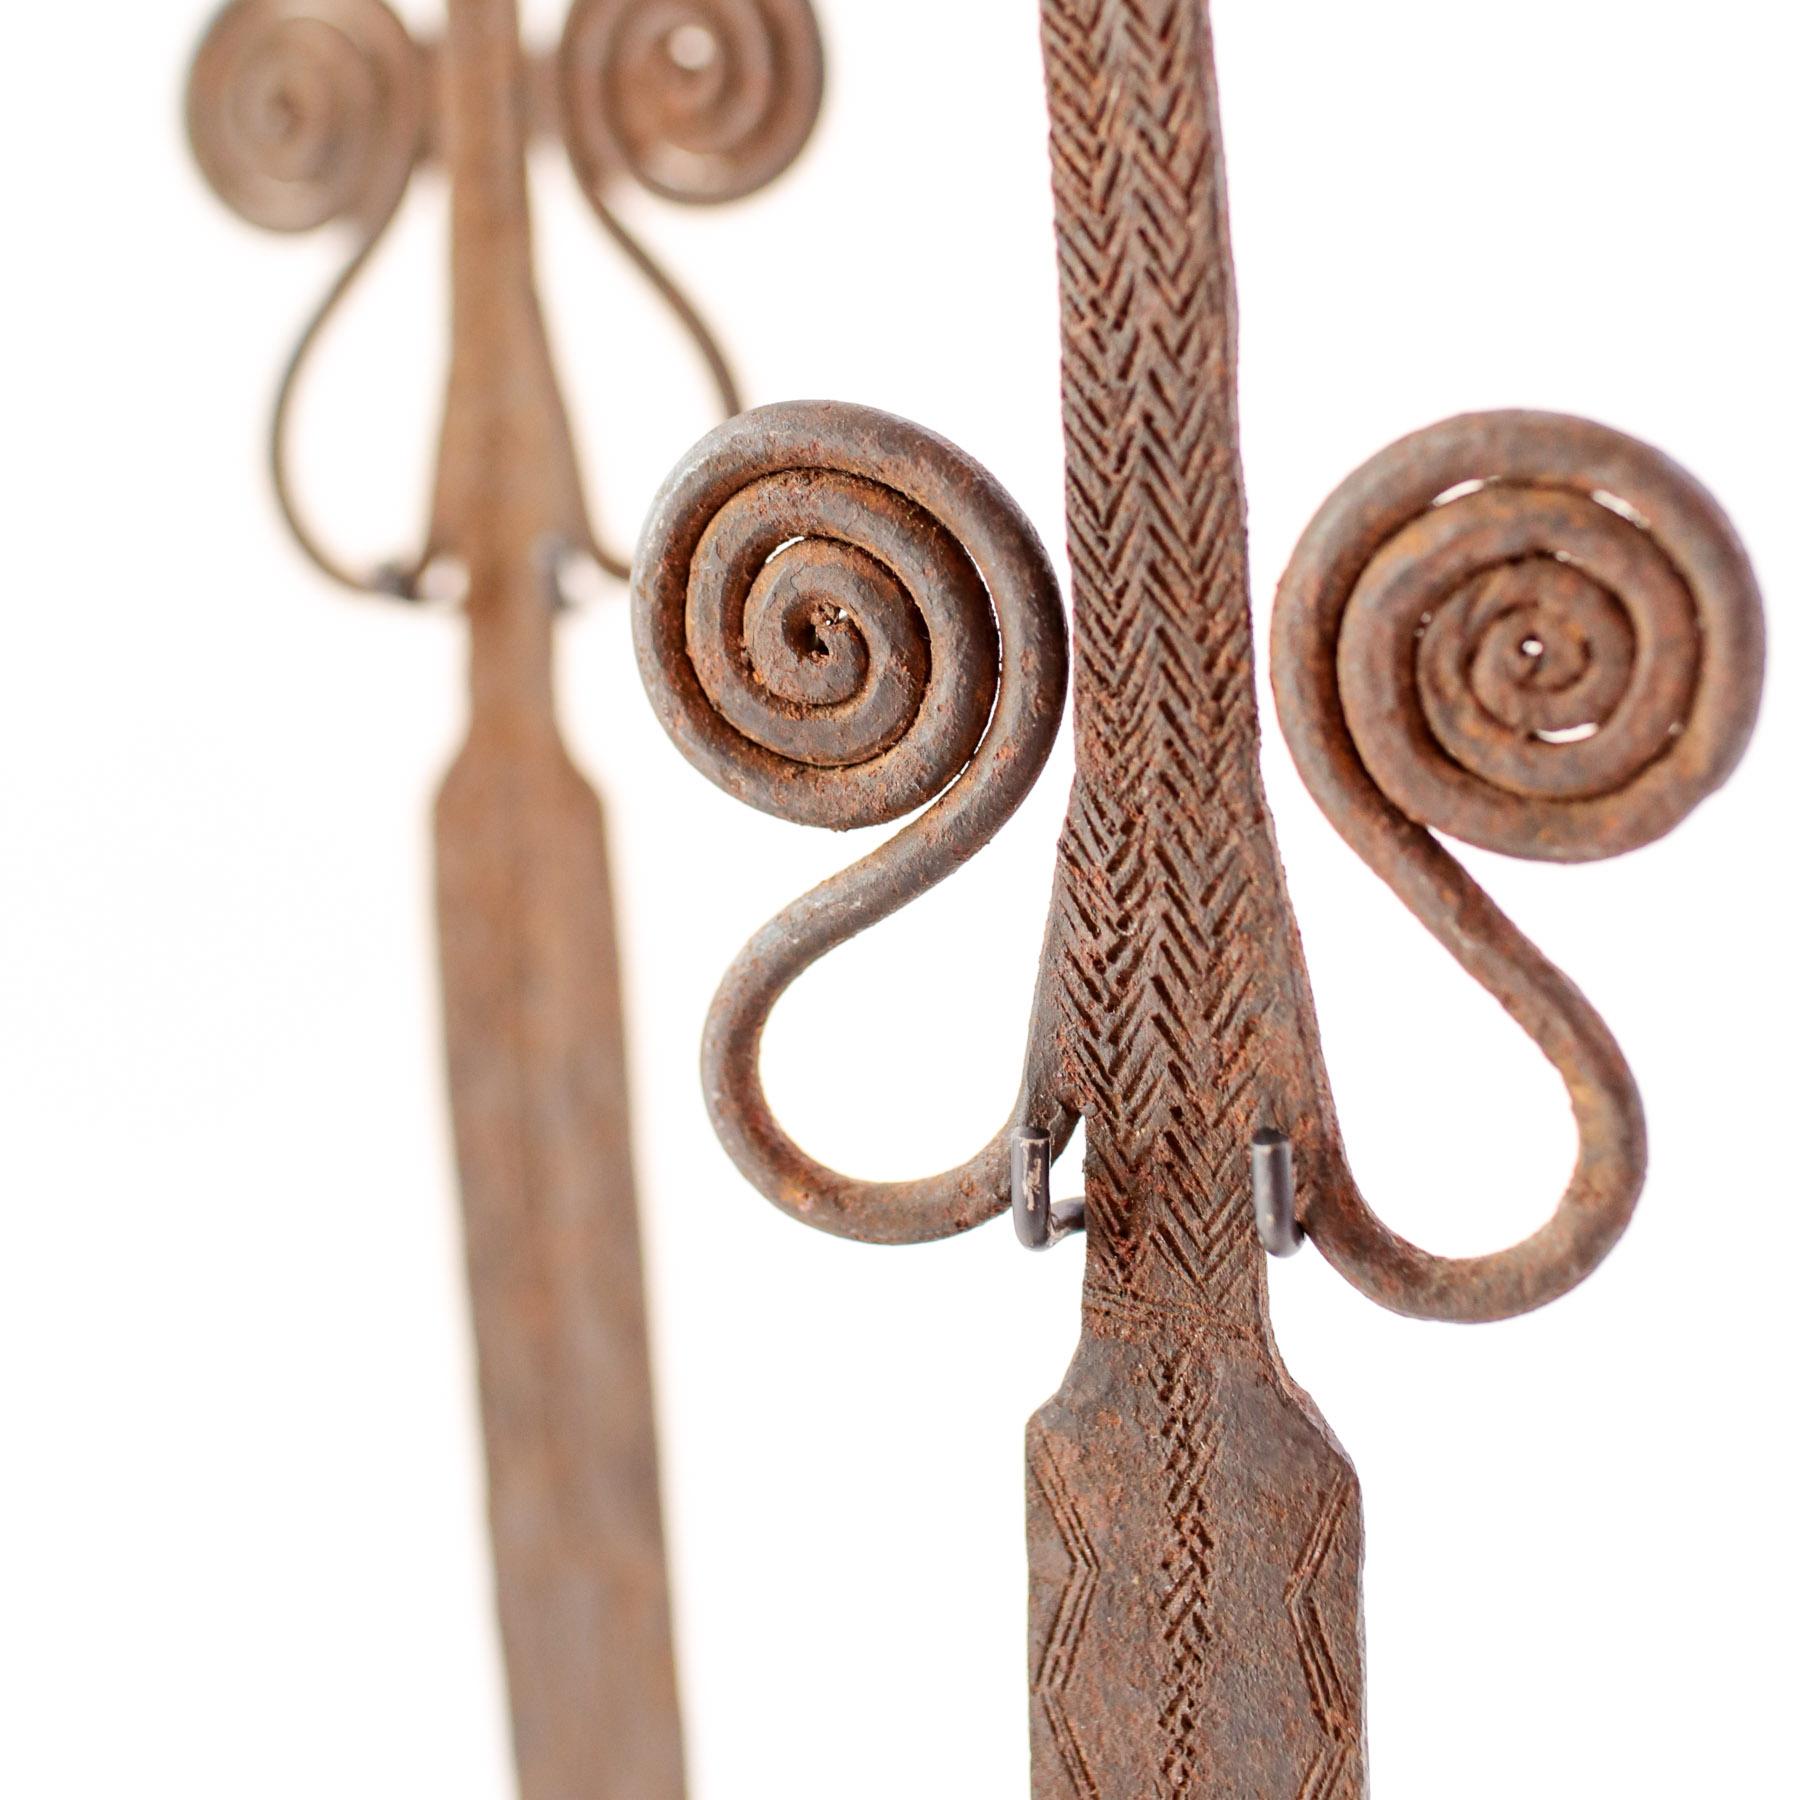 This is a matched pair of forged iron currencies from the Mumuye Tribe of Nigeria. The currency is in the rare form of figural spoons. Pre-1900. Displayed on custom metal stands. 

African Currency encompasses a variety of metal objects used in